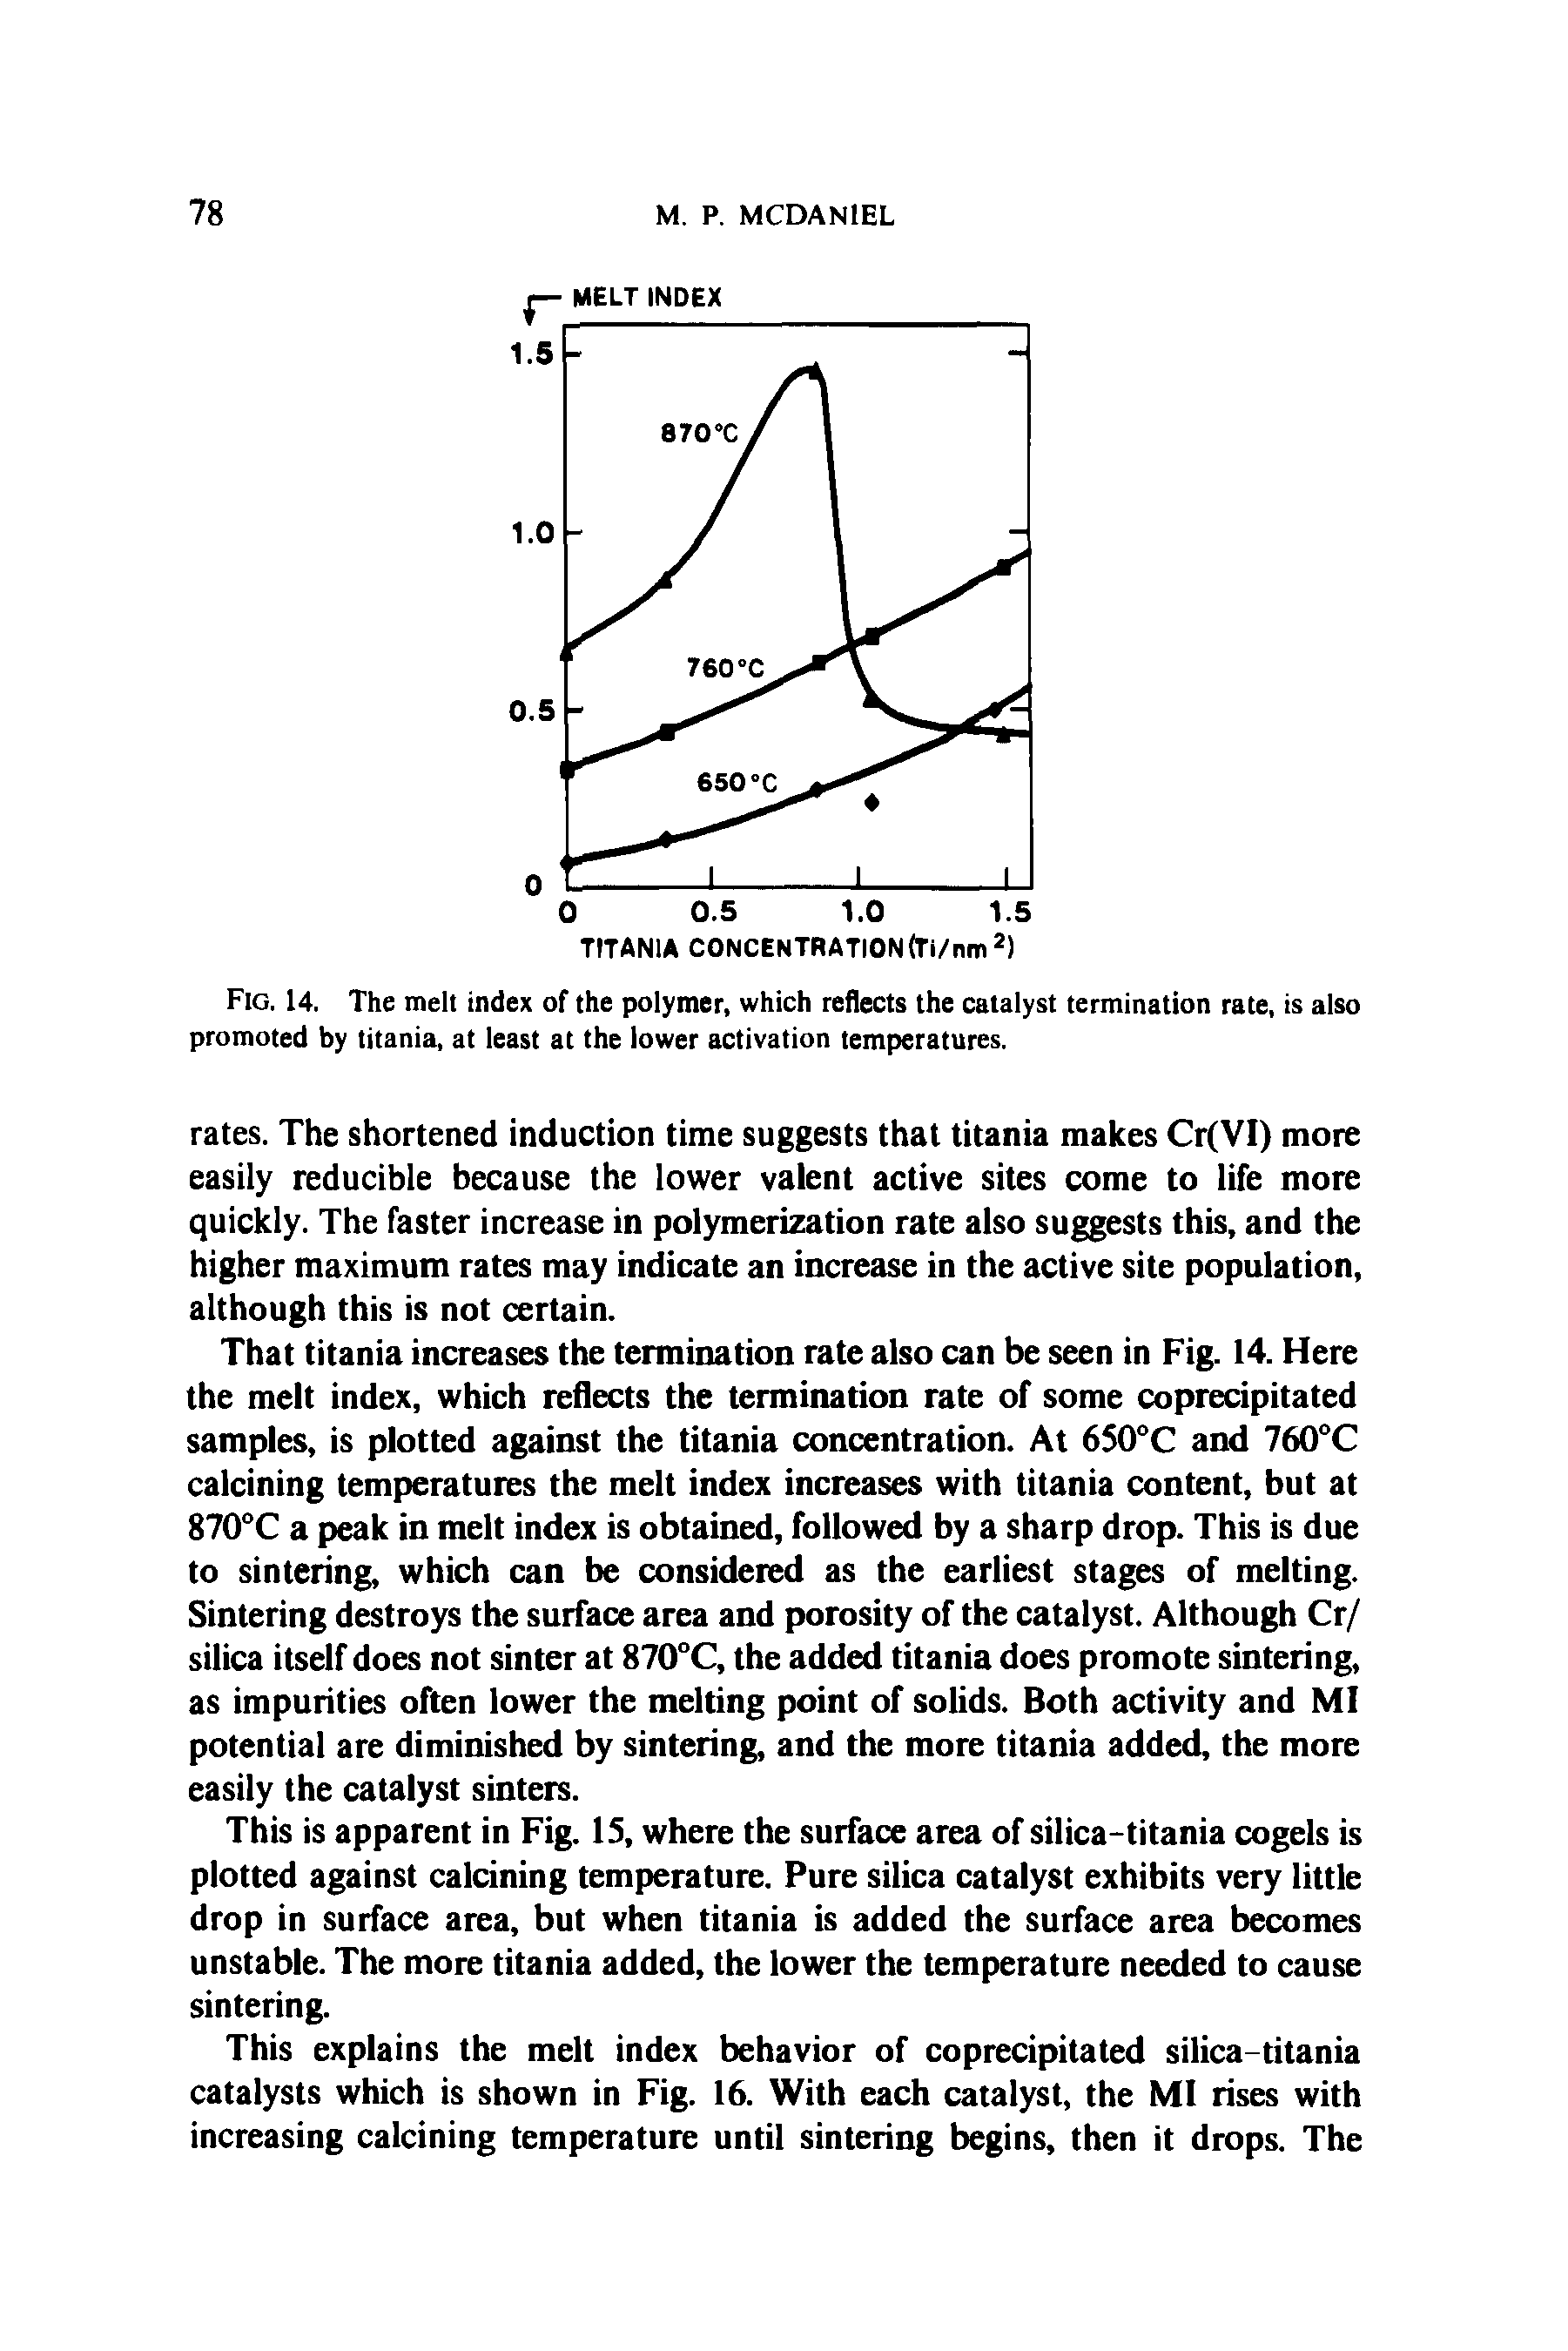 Fig. 14. The melt index of the polymer, which reflects the catalyst termination rate, is also promoted by titania, at least at the lower activation temperatures.